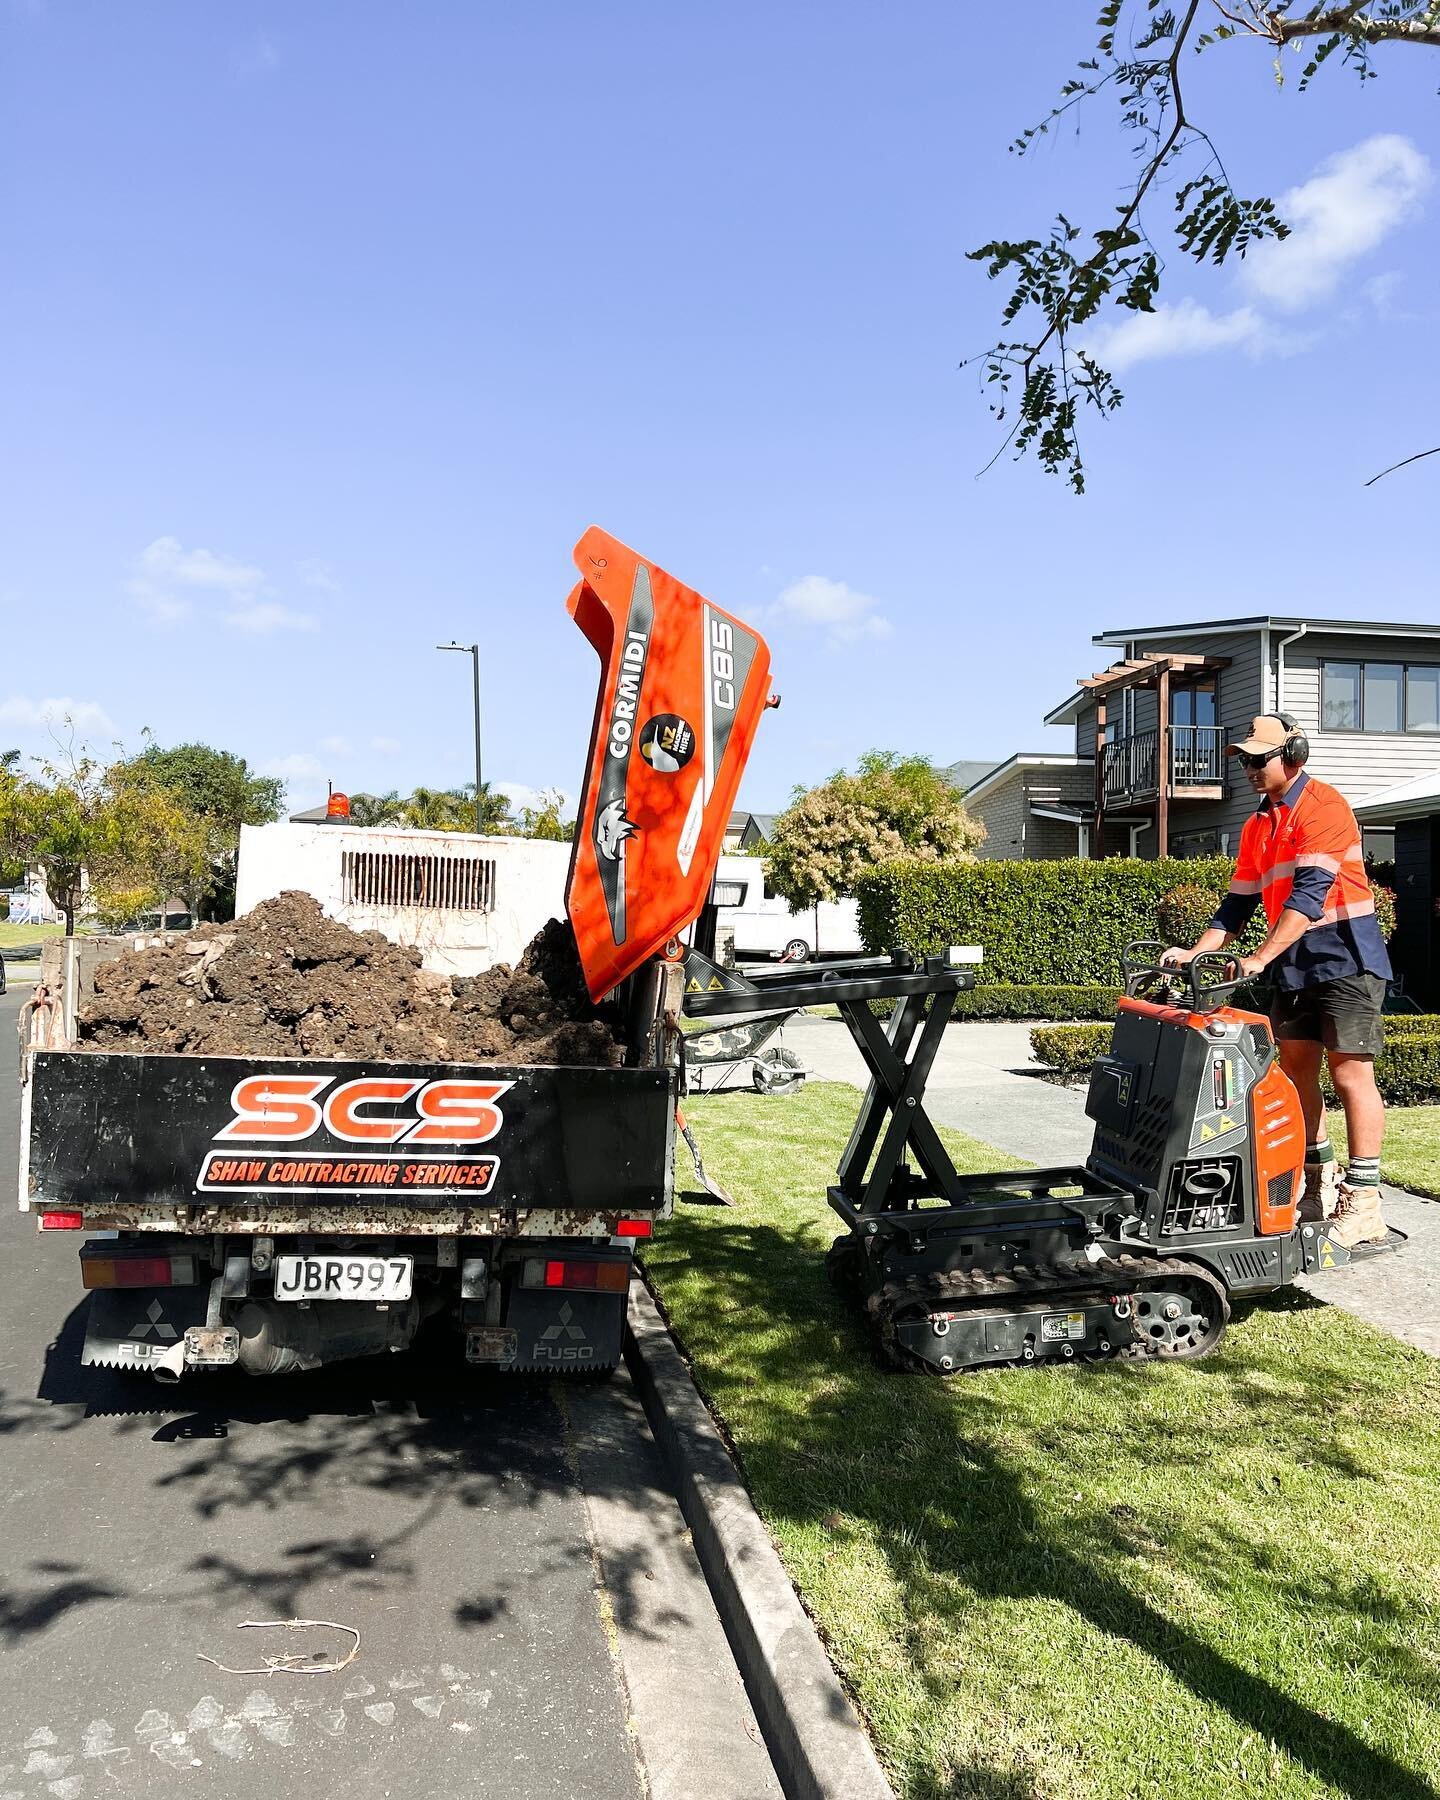 Big thanks to @prontohirenz for putting us onto @nzmachinehire to help us get the job done with their 800kg Cormidi loader! Our team at Shaw Contracting Services is committed to delivering exceptional results for our clients, and we couldn't have don